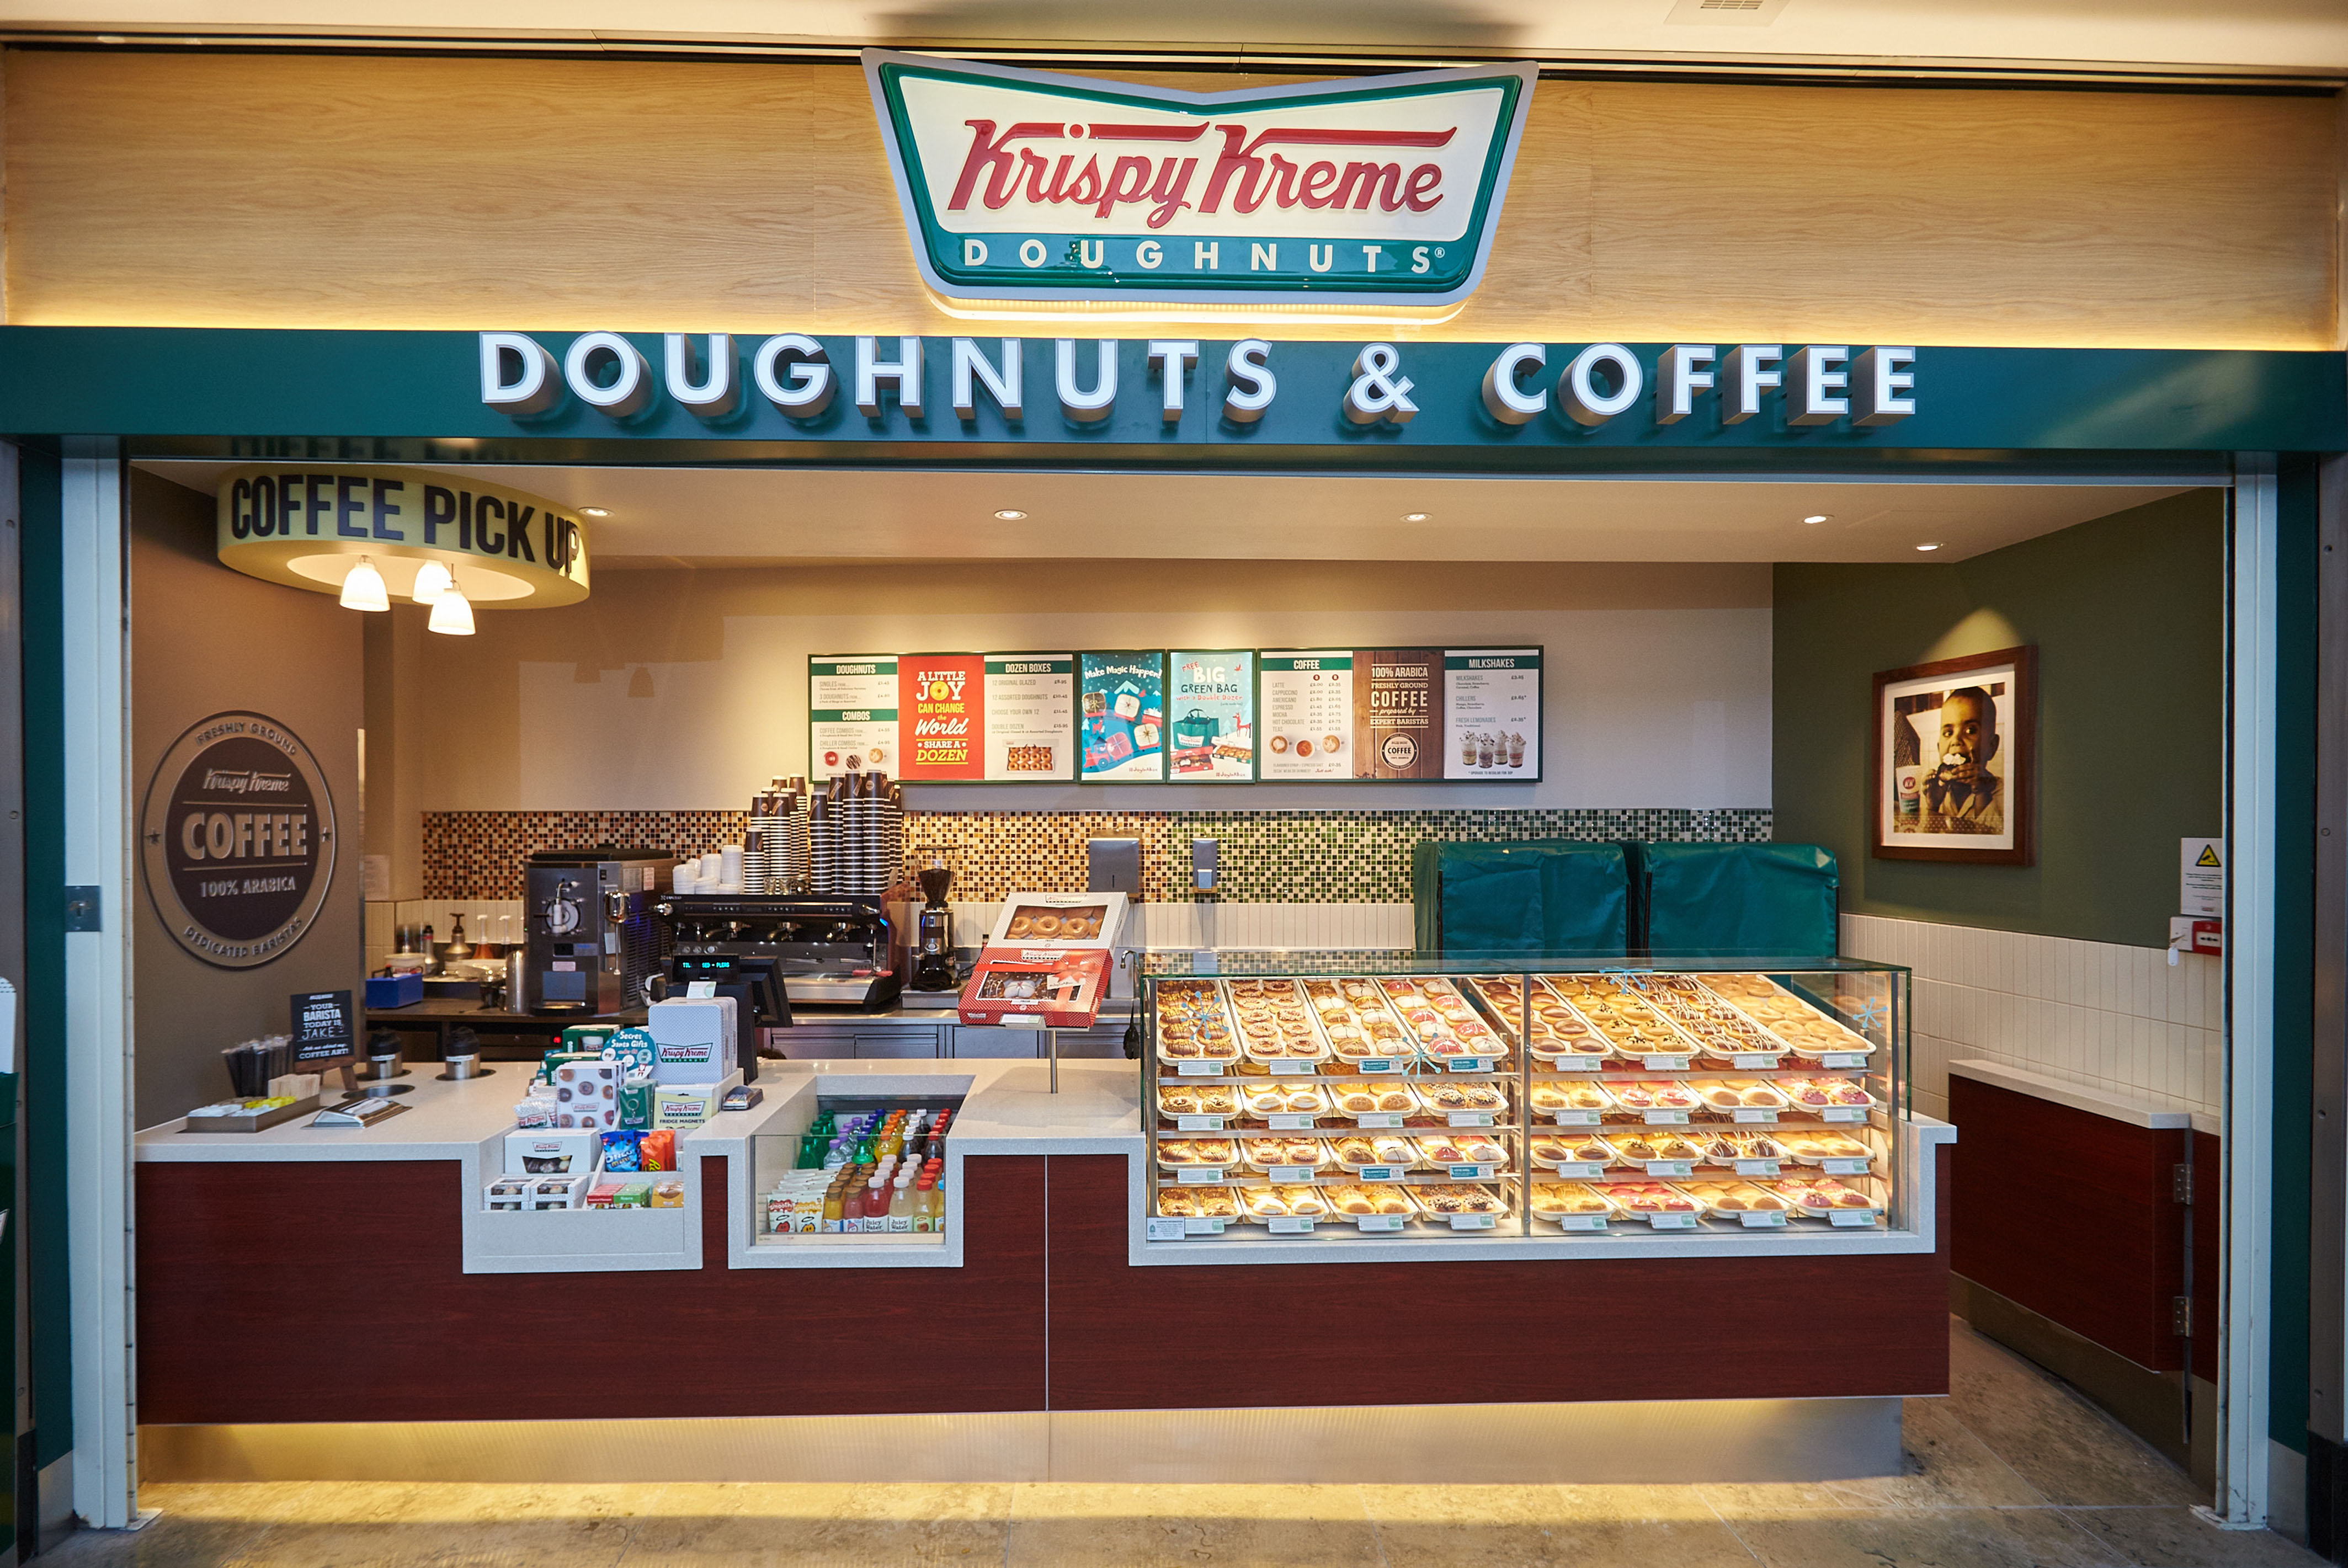 34 tasty facts you didn't know about Krispy Kreme